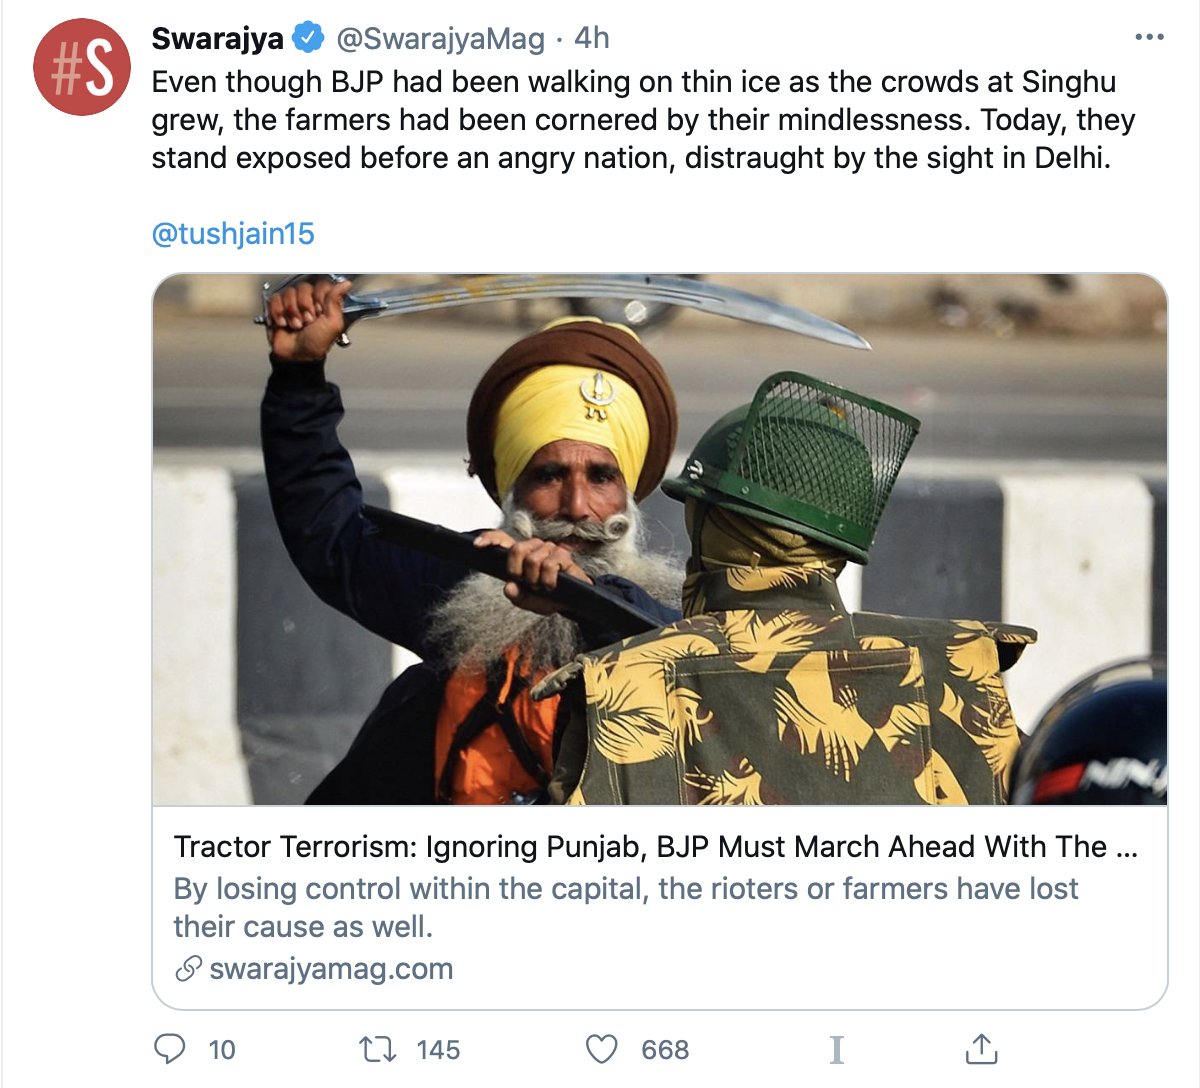 That occupation was technically illegal (it was recorded in a FIR) and actually was a time where Nihangs "struck first".Yet while covering this incident; Swarajya chose to make this Nihang-Singh their visible face of "Tractor Terrorism". Ironic?